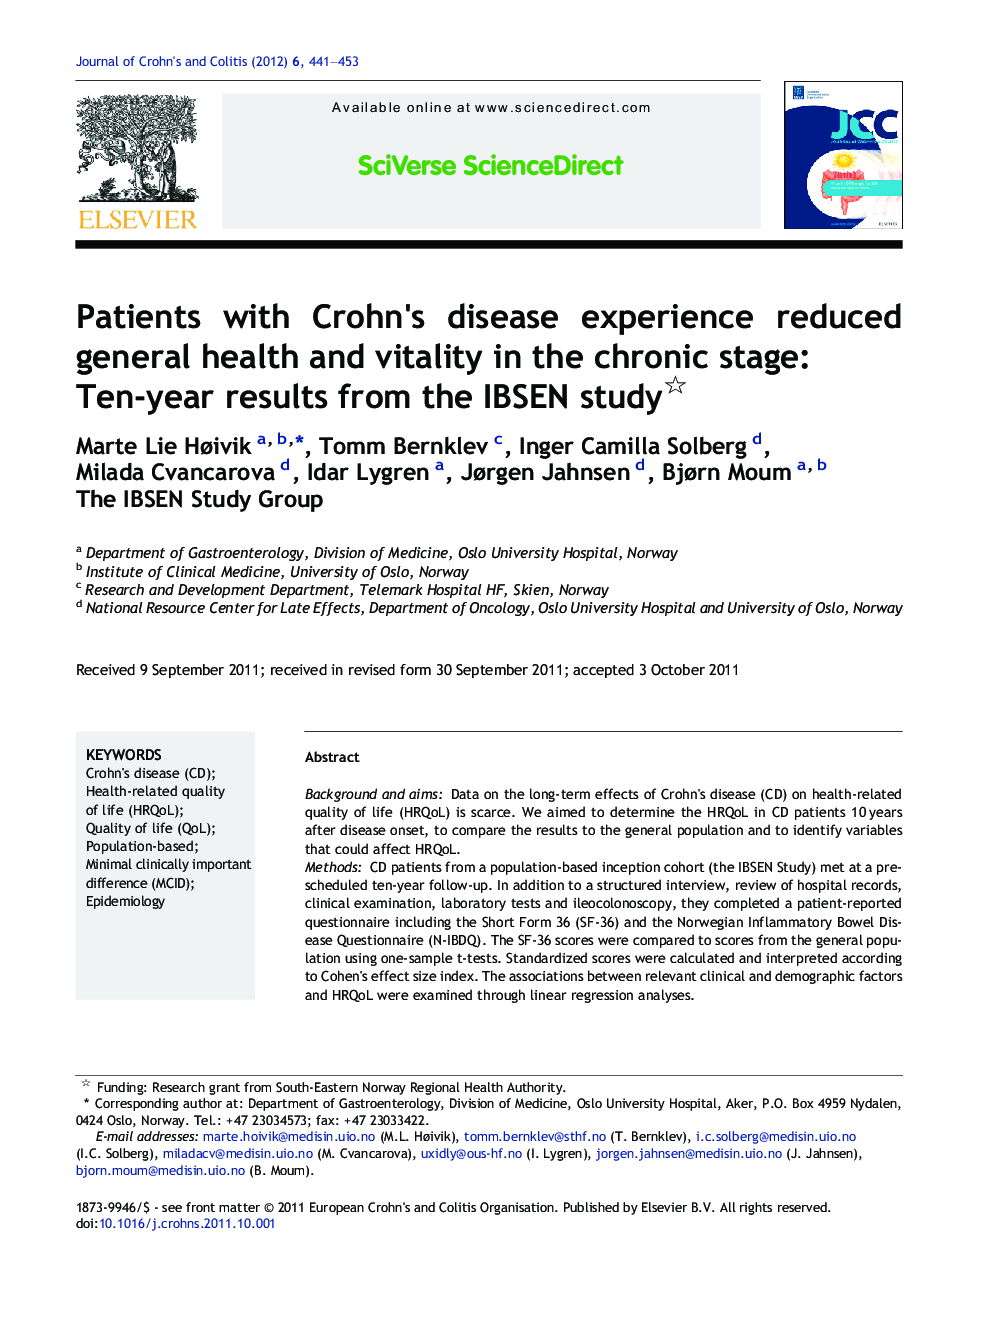 Patients with Crohn's disease experience reduced general health and vitality in the chronic stage: Ten-year results from the IBSEN study